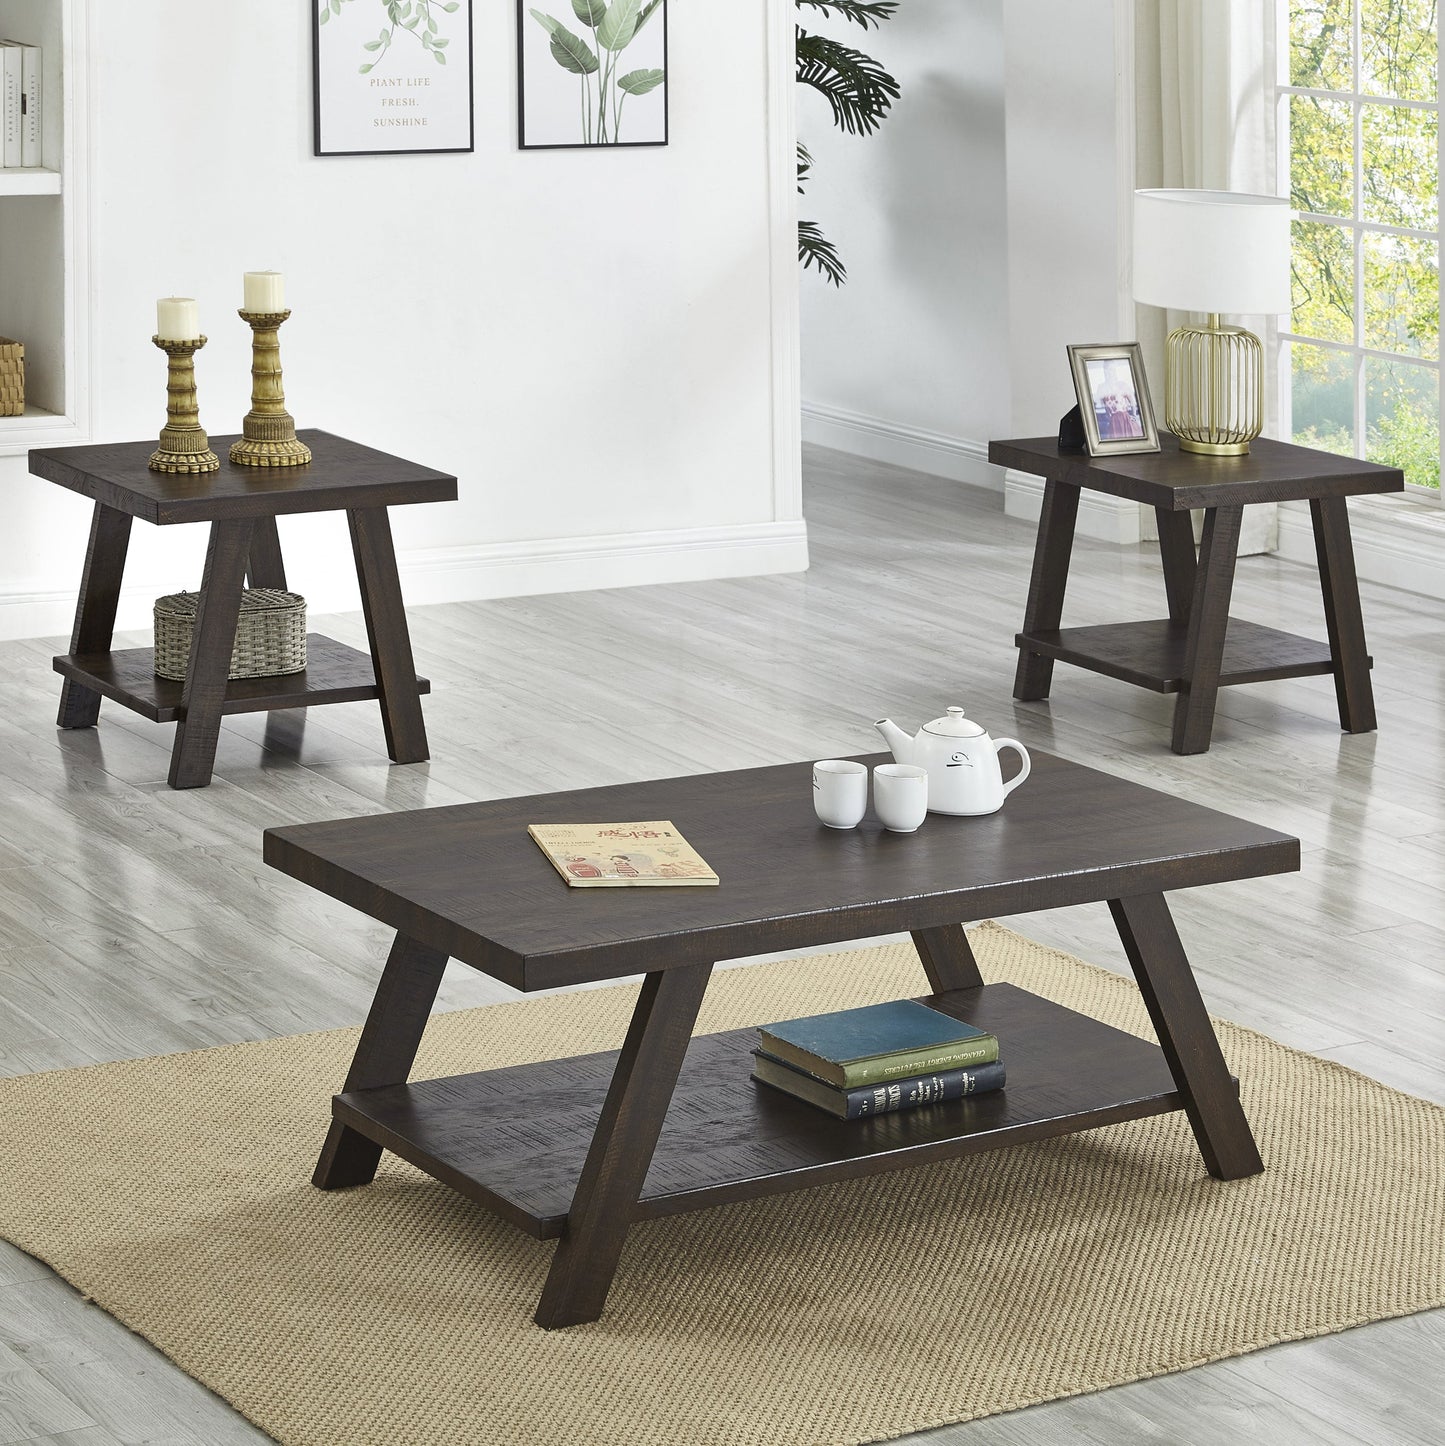 Athens Contemporary 3-Piece Wood Shelf Coffee Table Set in Weathered Espresso